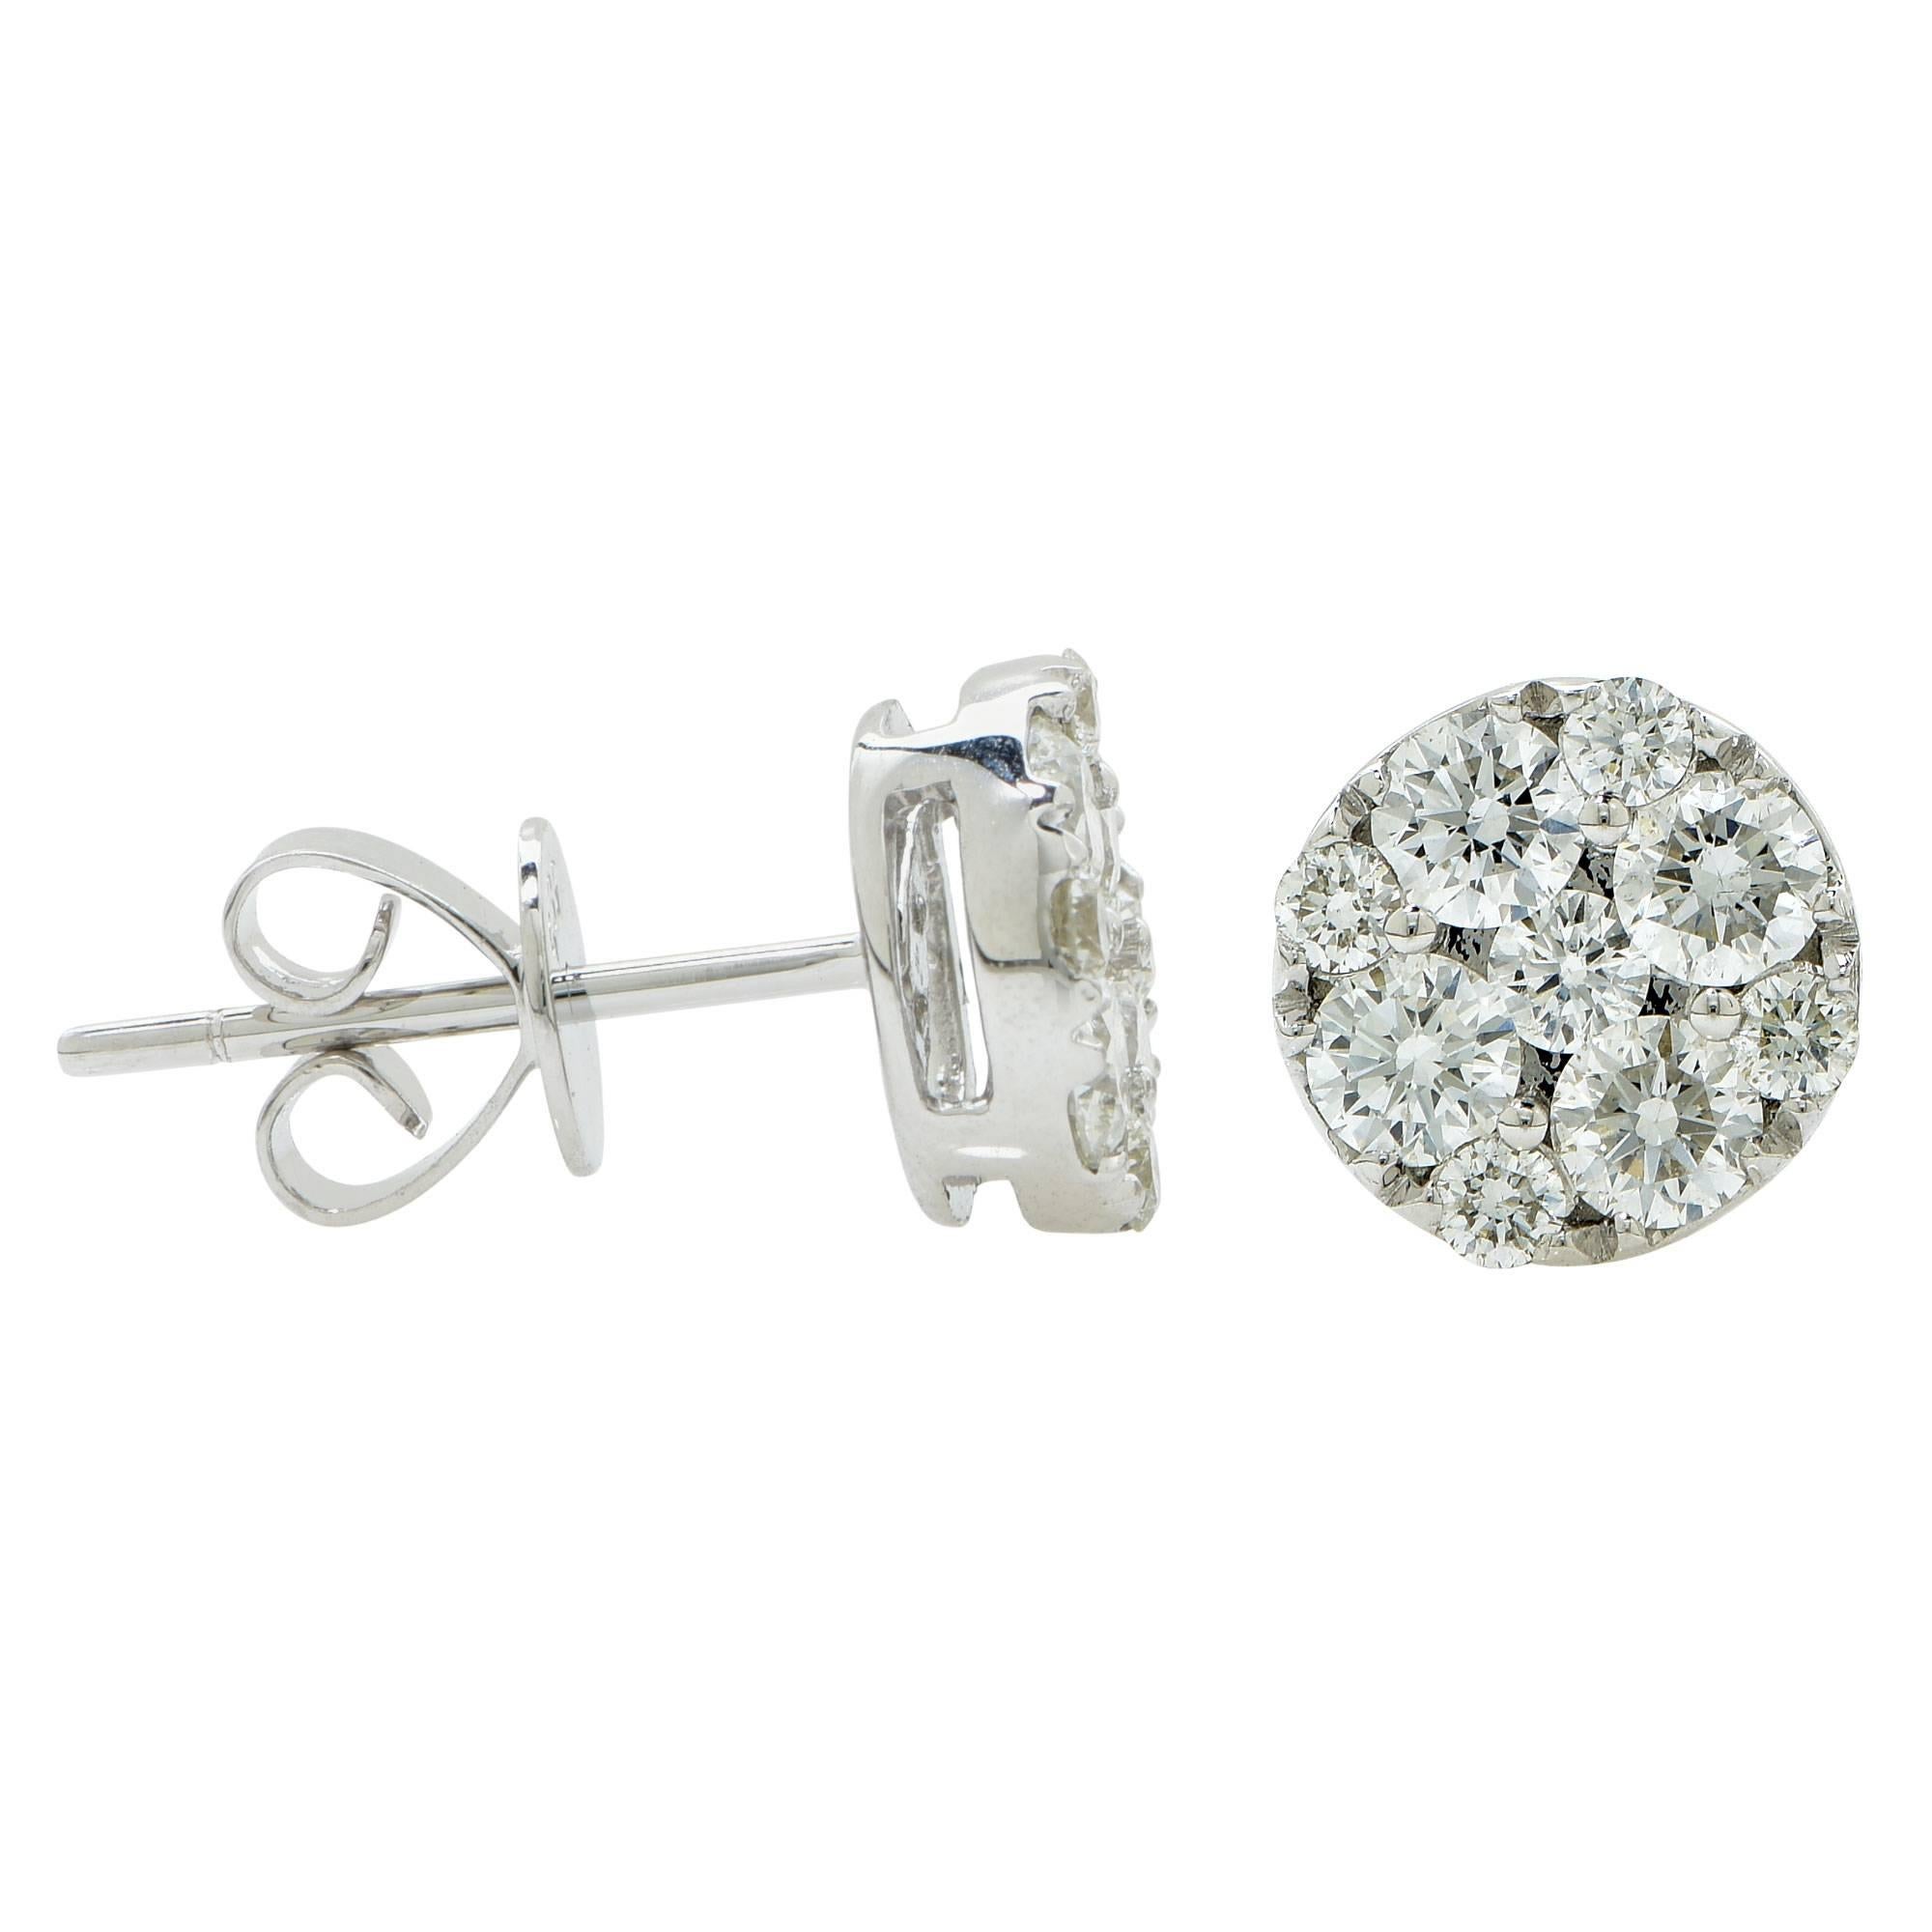 14k white gold cluster earrings featuring 18 round brilliant cut diamonds weighing 1ct total G color VS clarity.

It is stamped and/or tested as 14k gold.
The metal weight is 1.86 grams.

These diamond earrings are accompanied by a retail appraisal